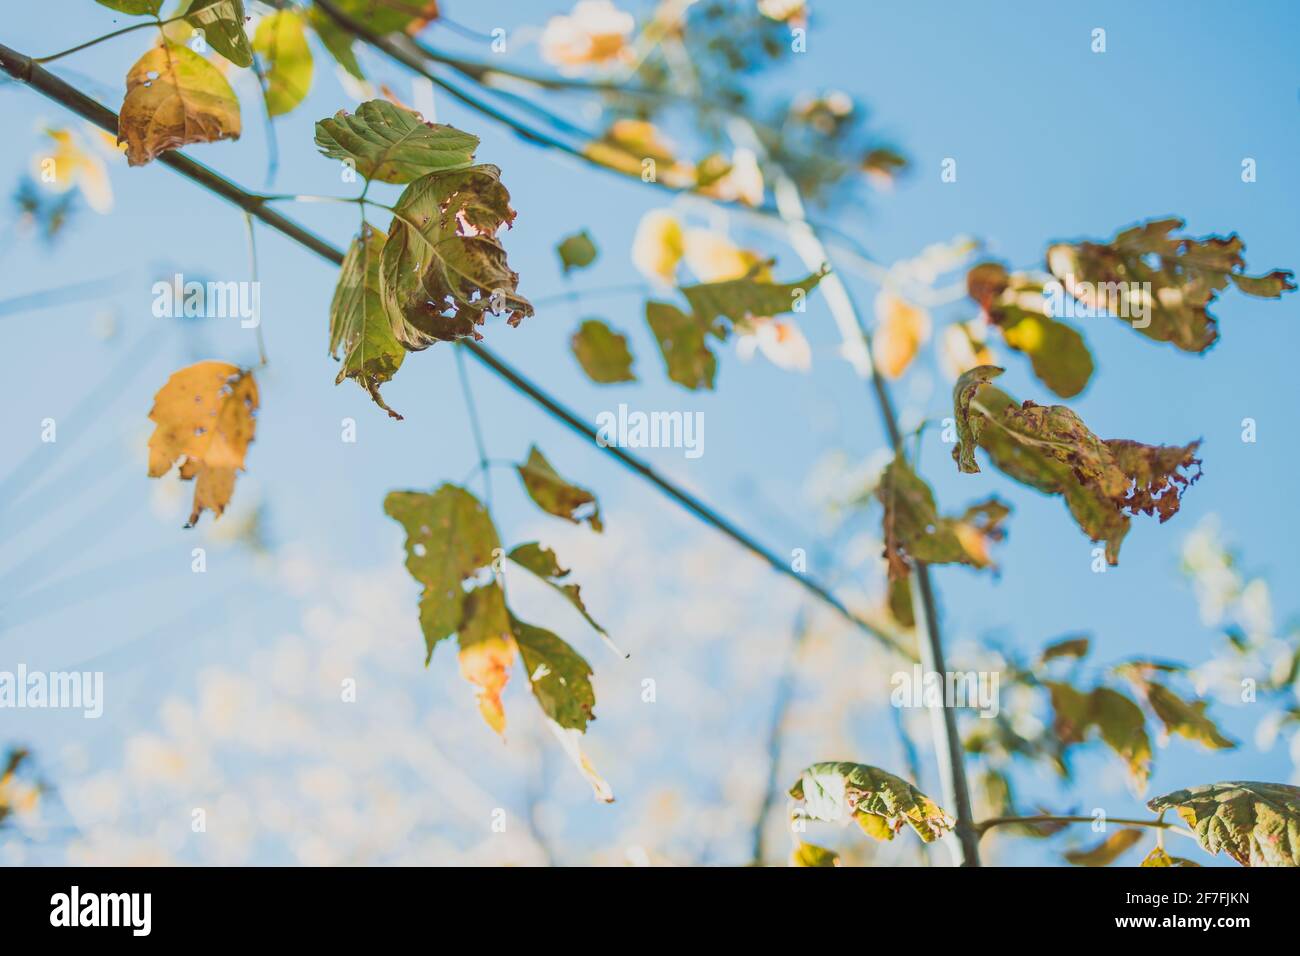 close-up of golden autumn leaves on the branches of a big tree outdoor in sunny backyard shot at shallow depth of field Stock Photo